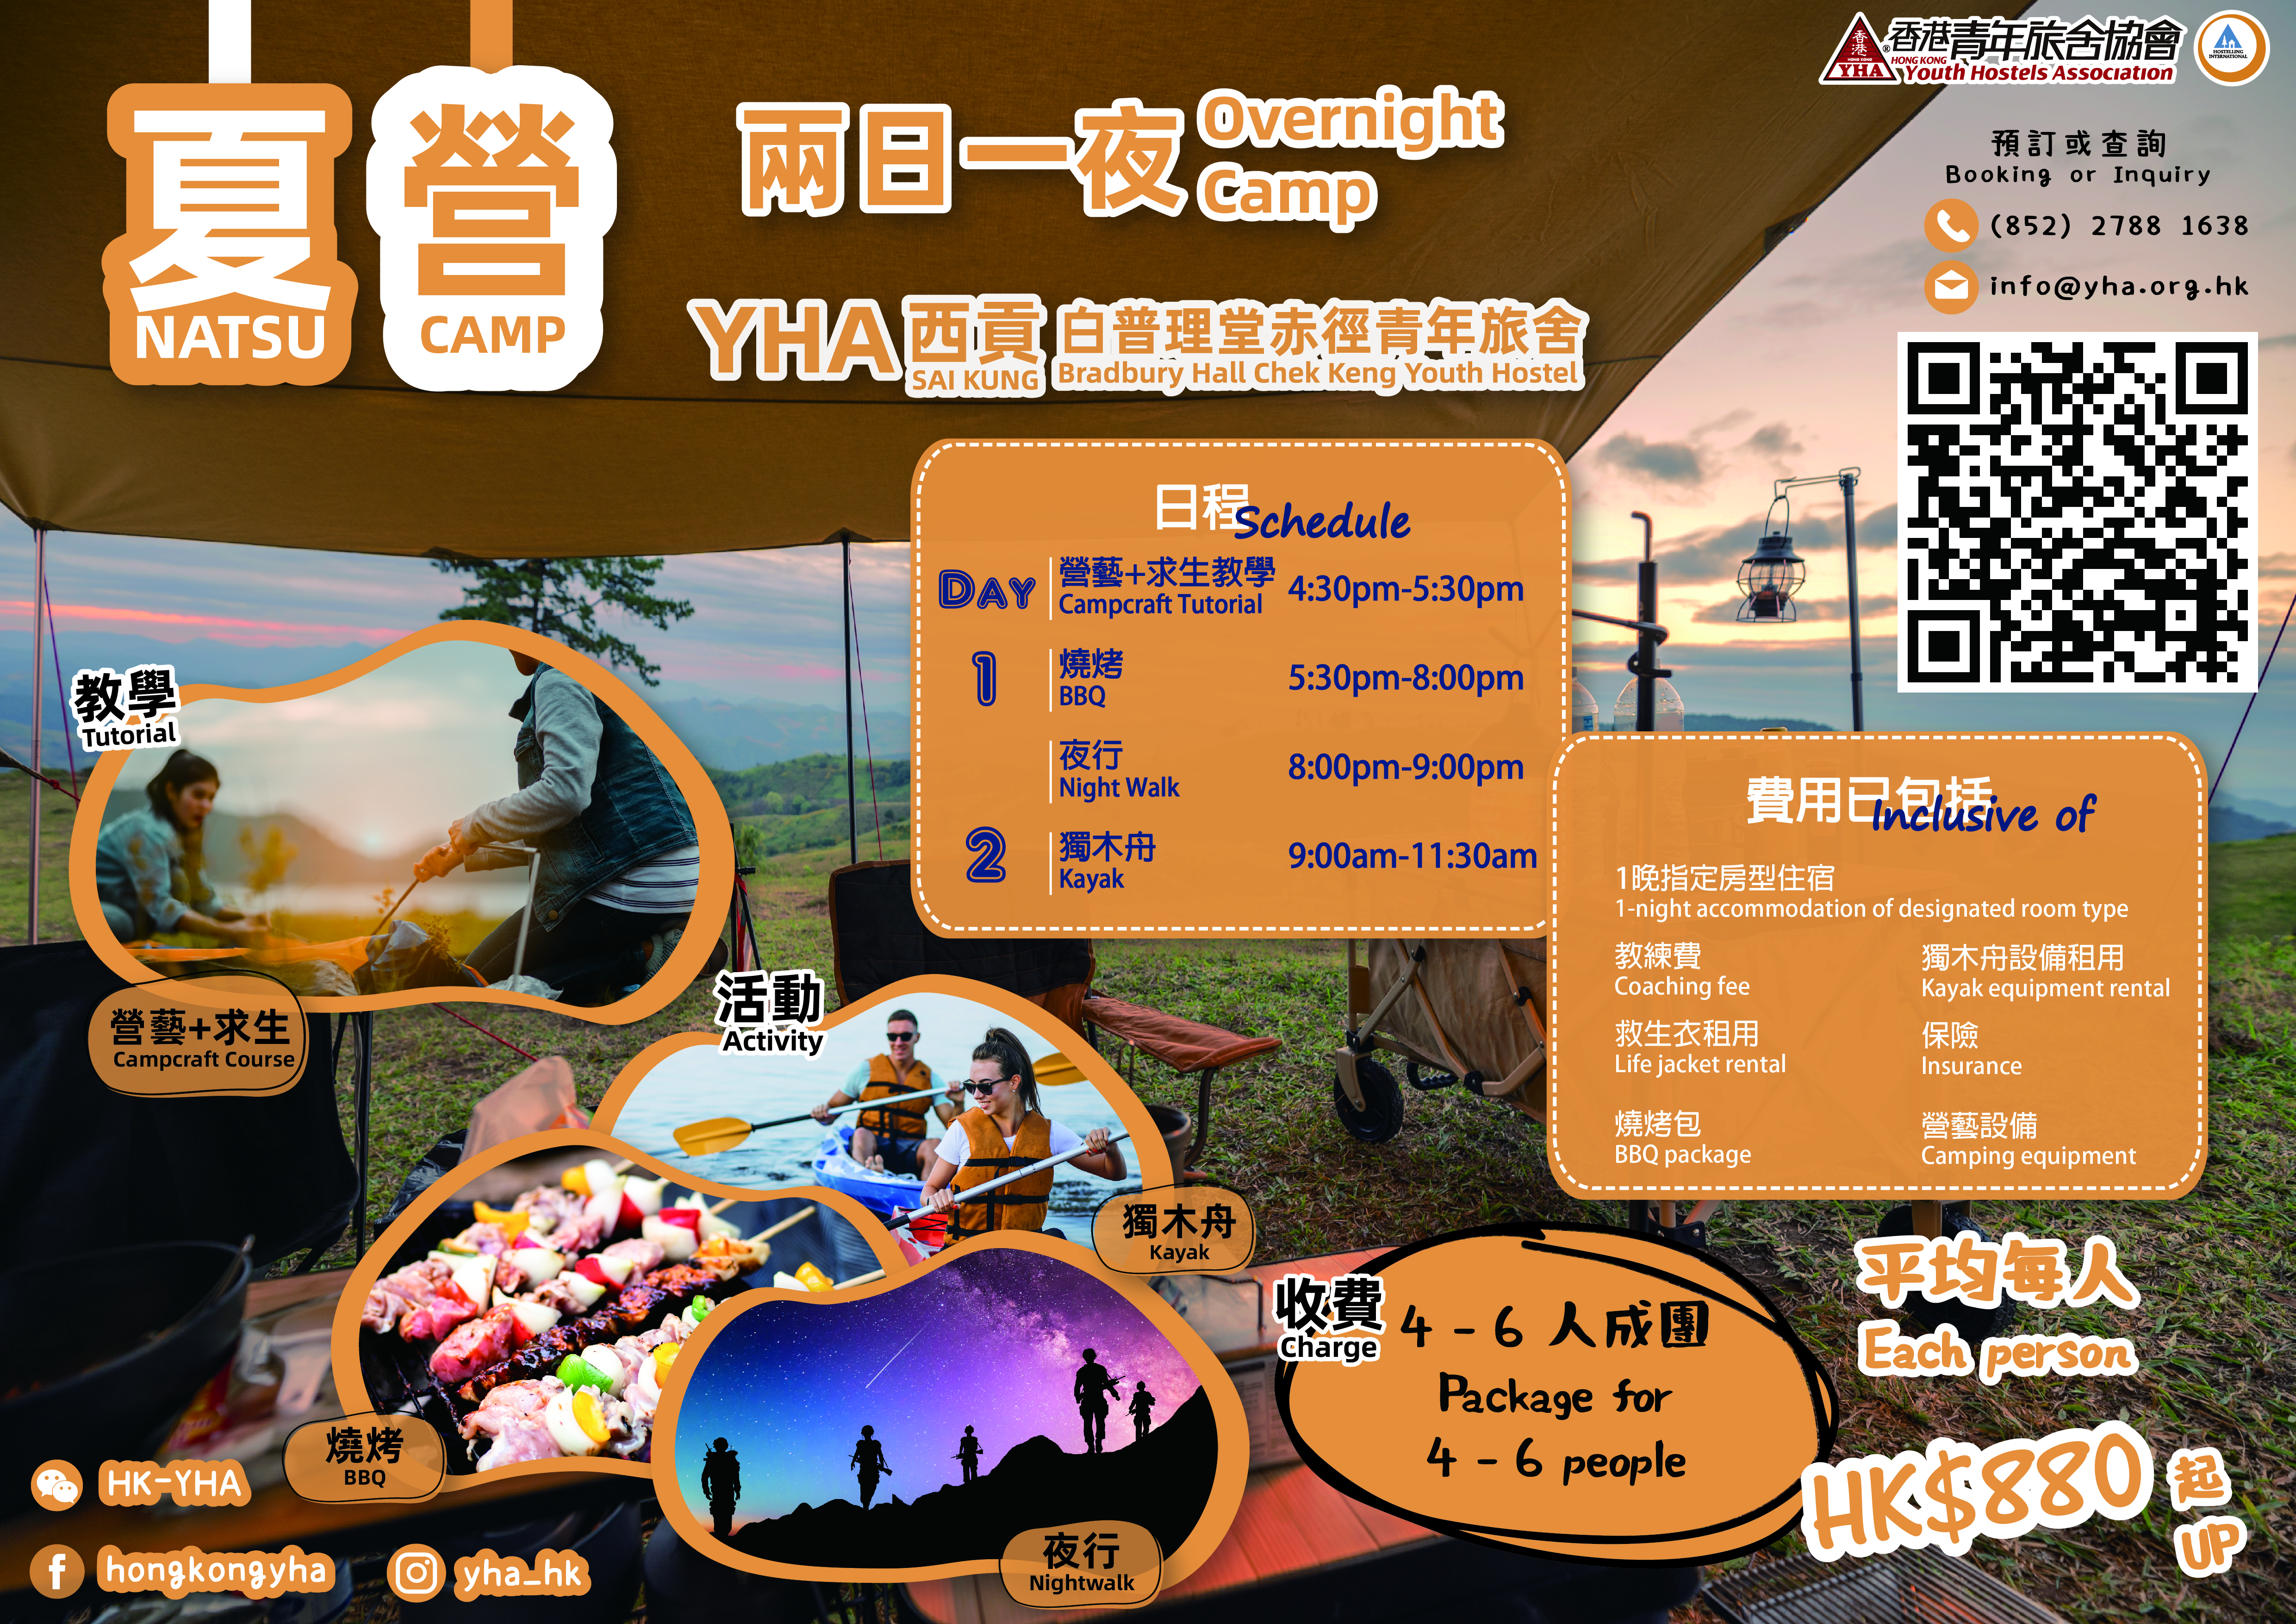 (Chek Keng) 6-Person Natsu Overnight Camp Package